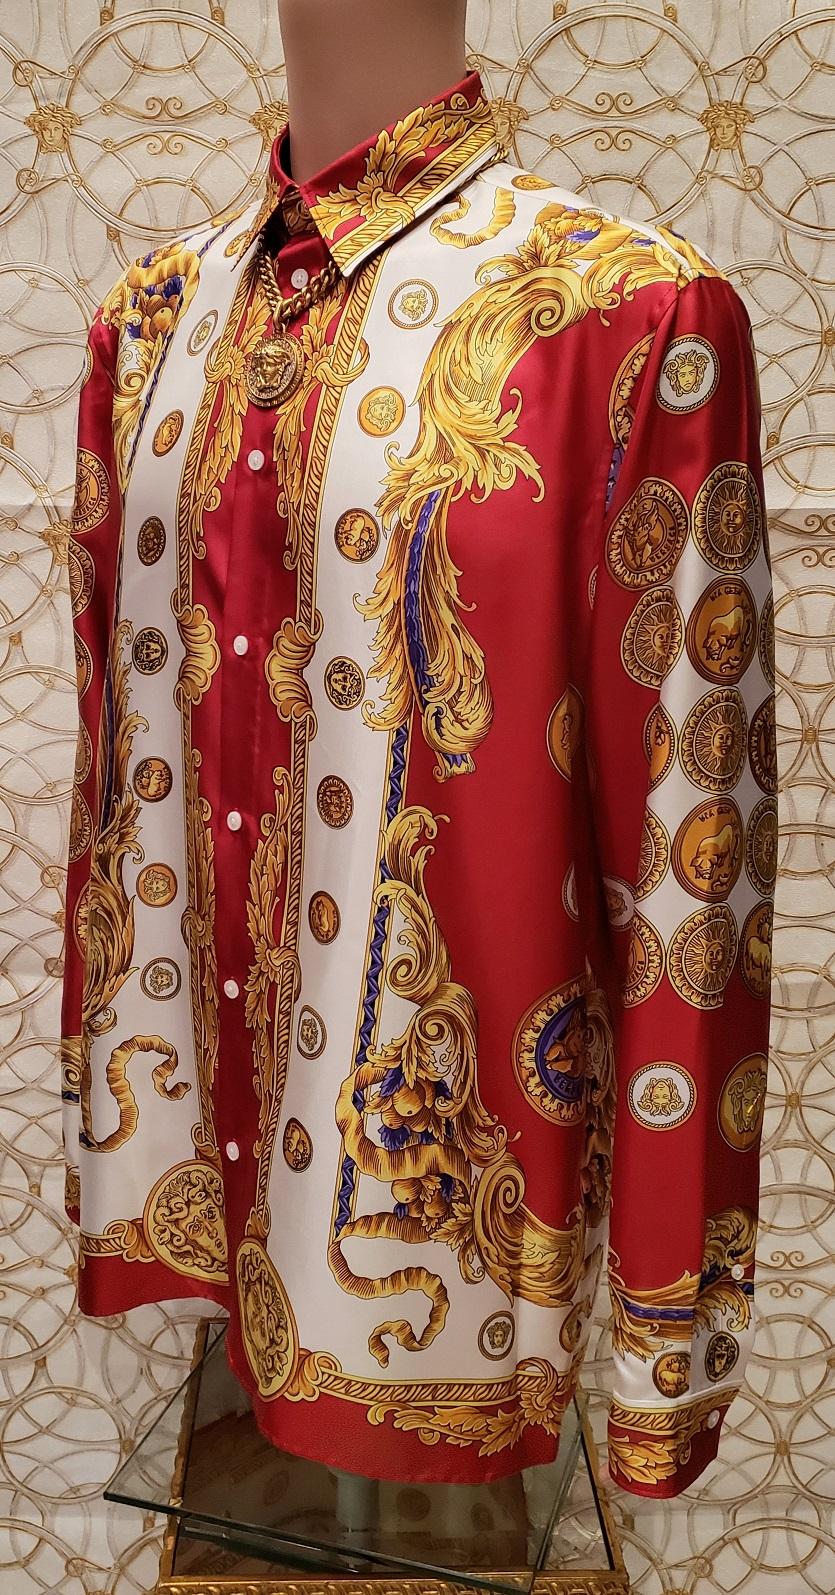 NEW VERSACE LUNAR NEW YEAR LIMITED EDITION SILK SHIRT Size 50 - L 8